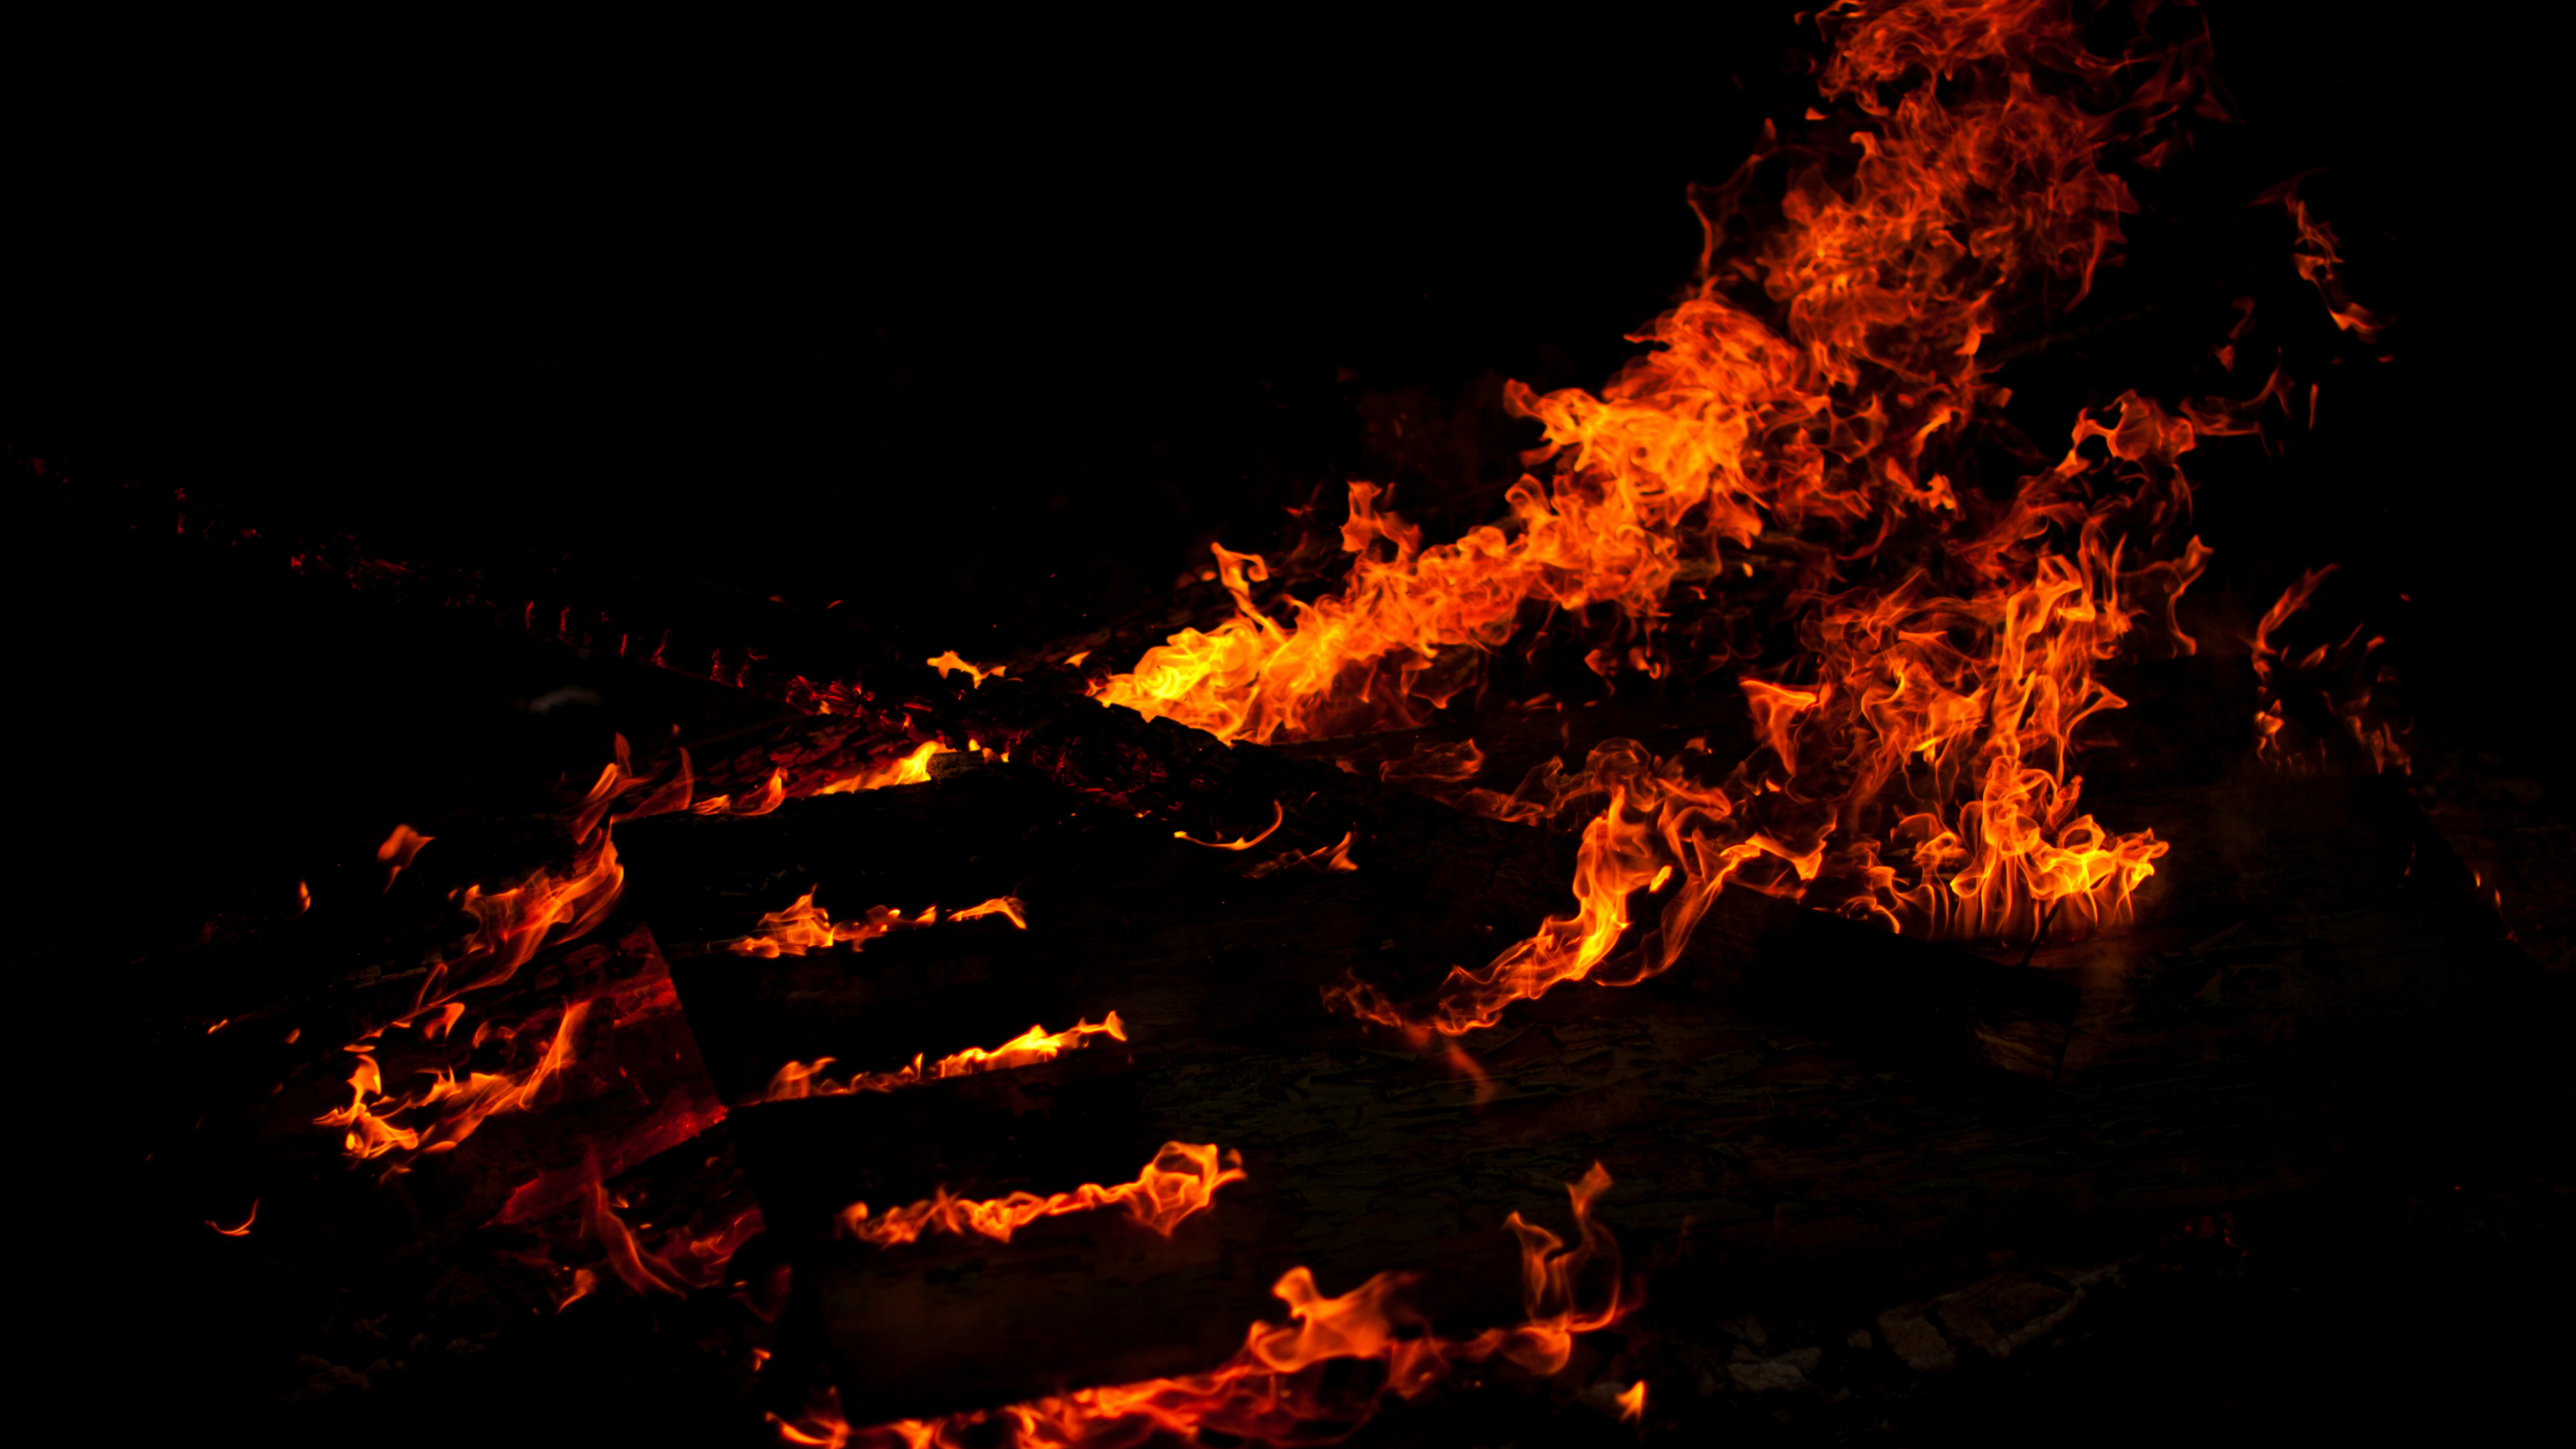 Fire on Fire During Night Time. Wallpaper in 3840x2160 Resolution